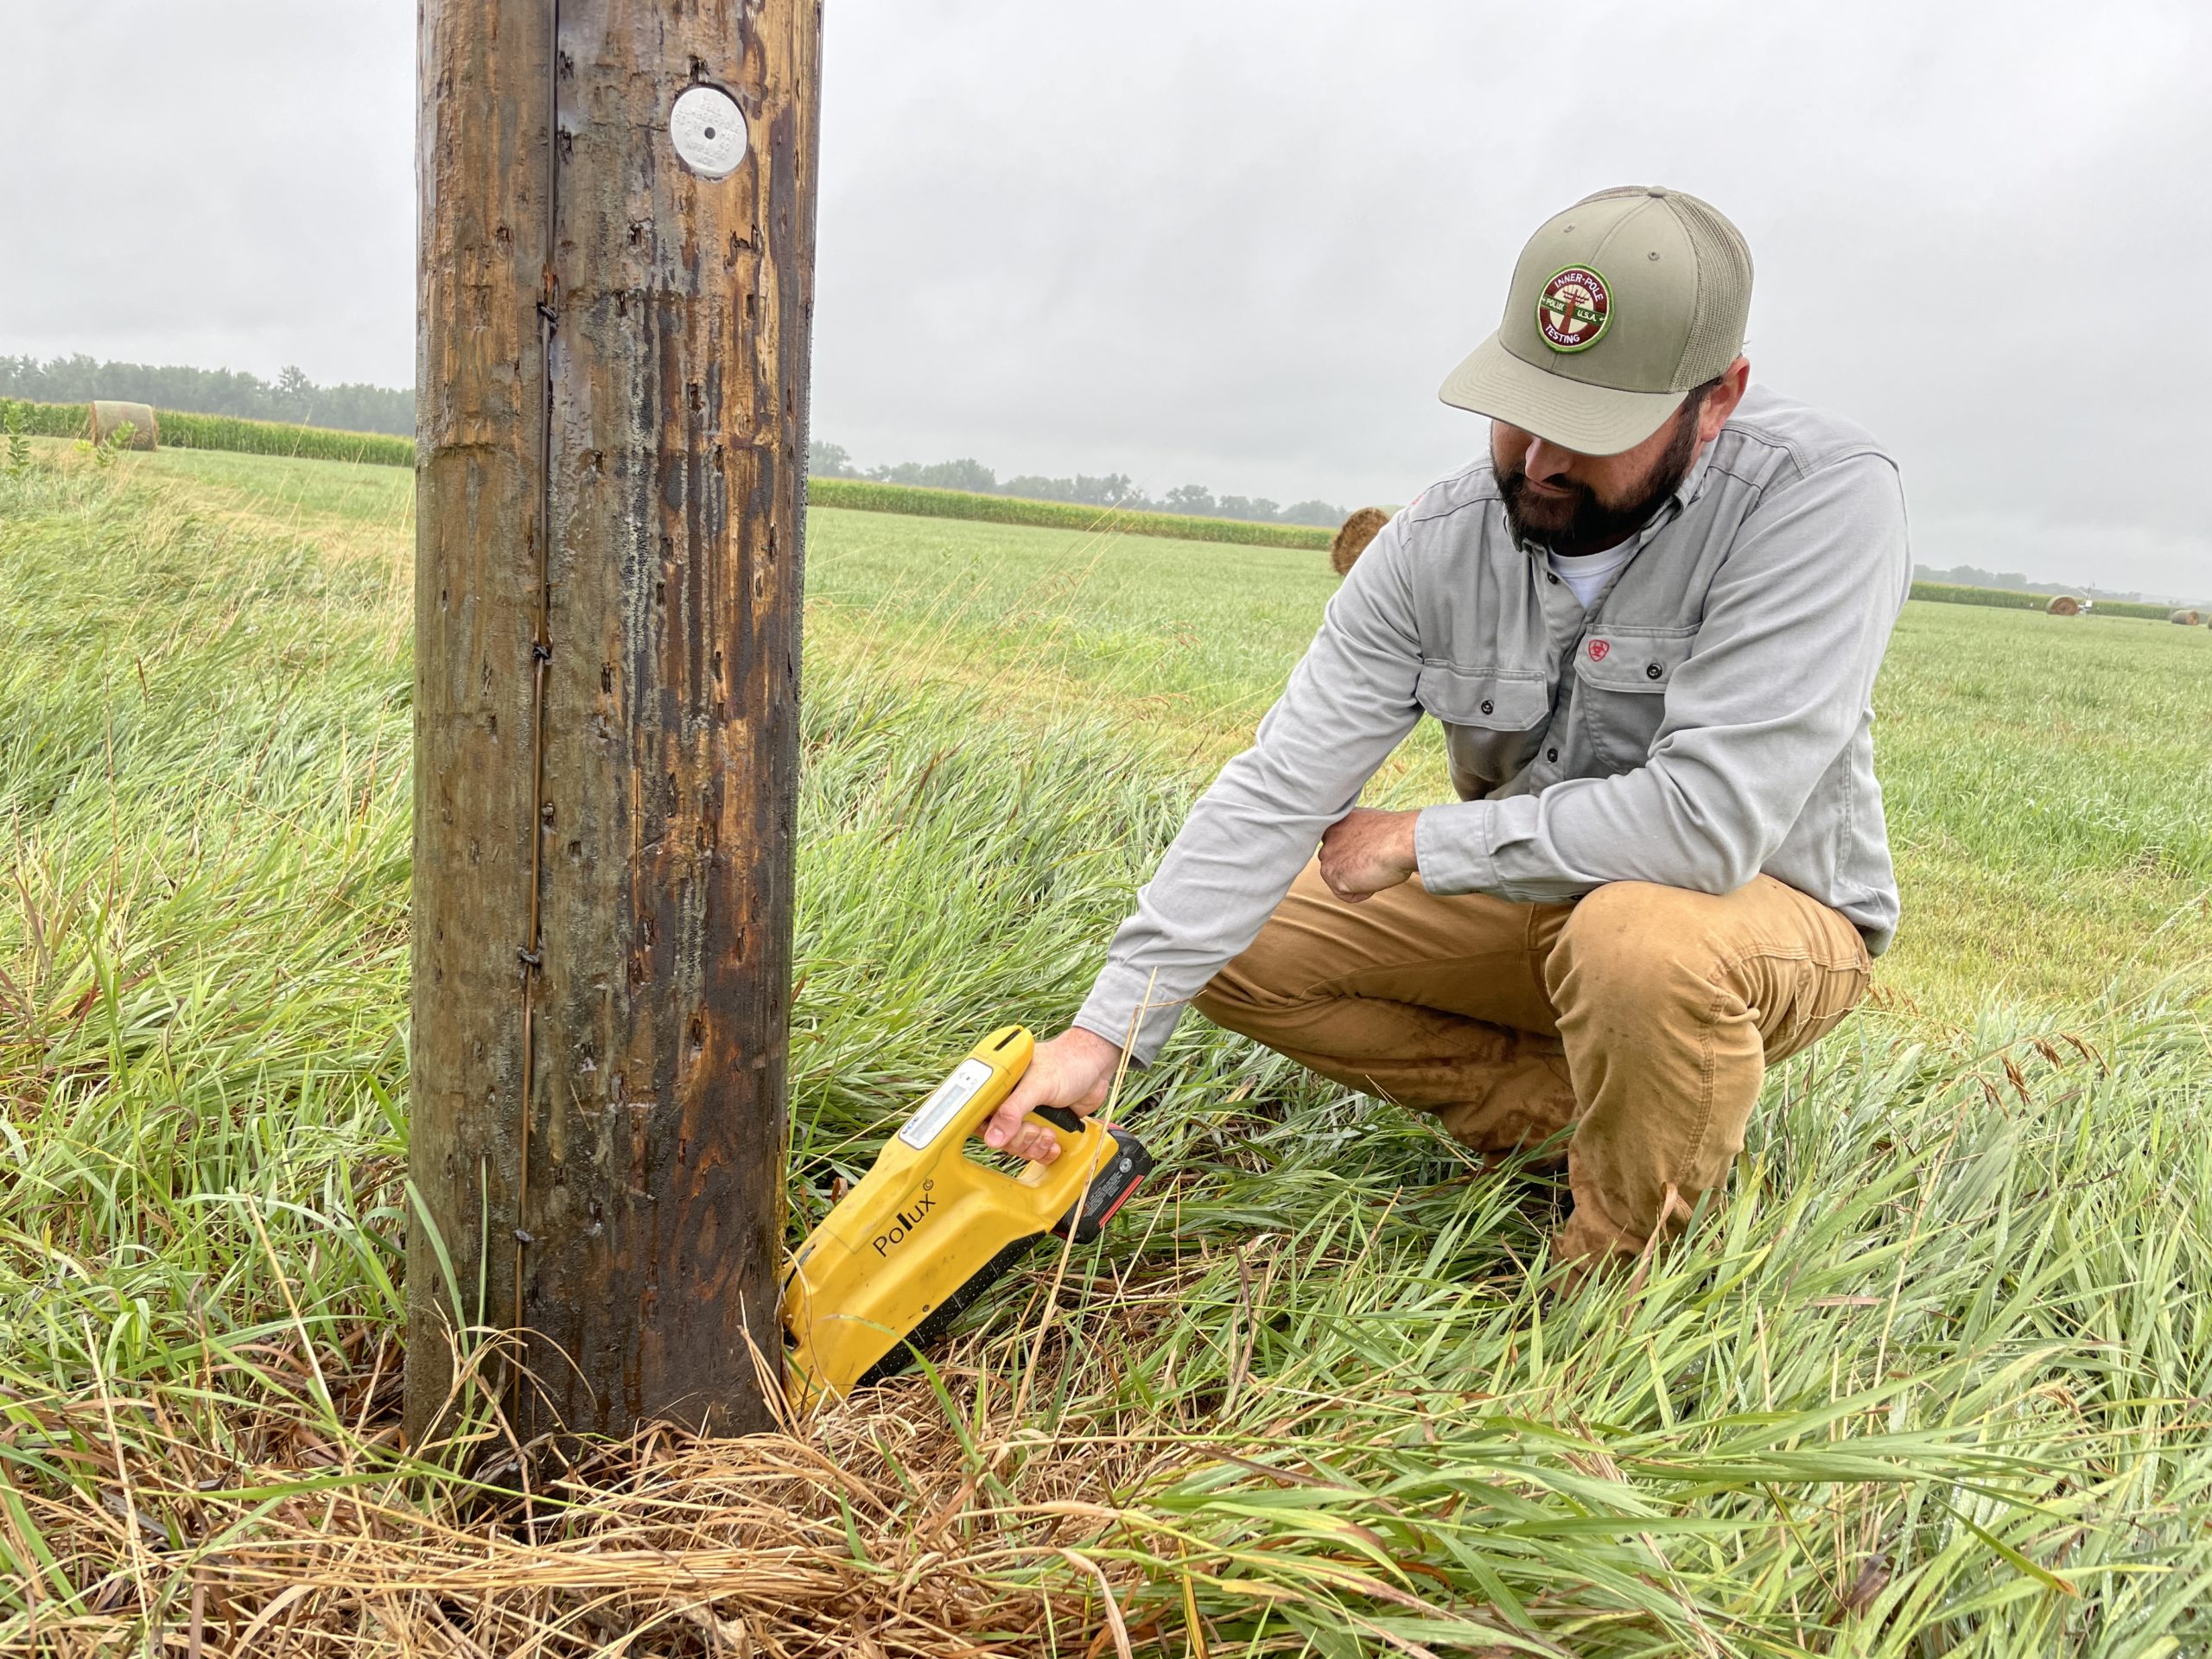 Picture of a man using a device to check for wood decay on a utility pole.